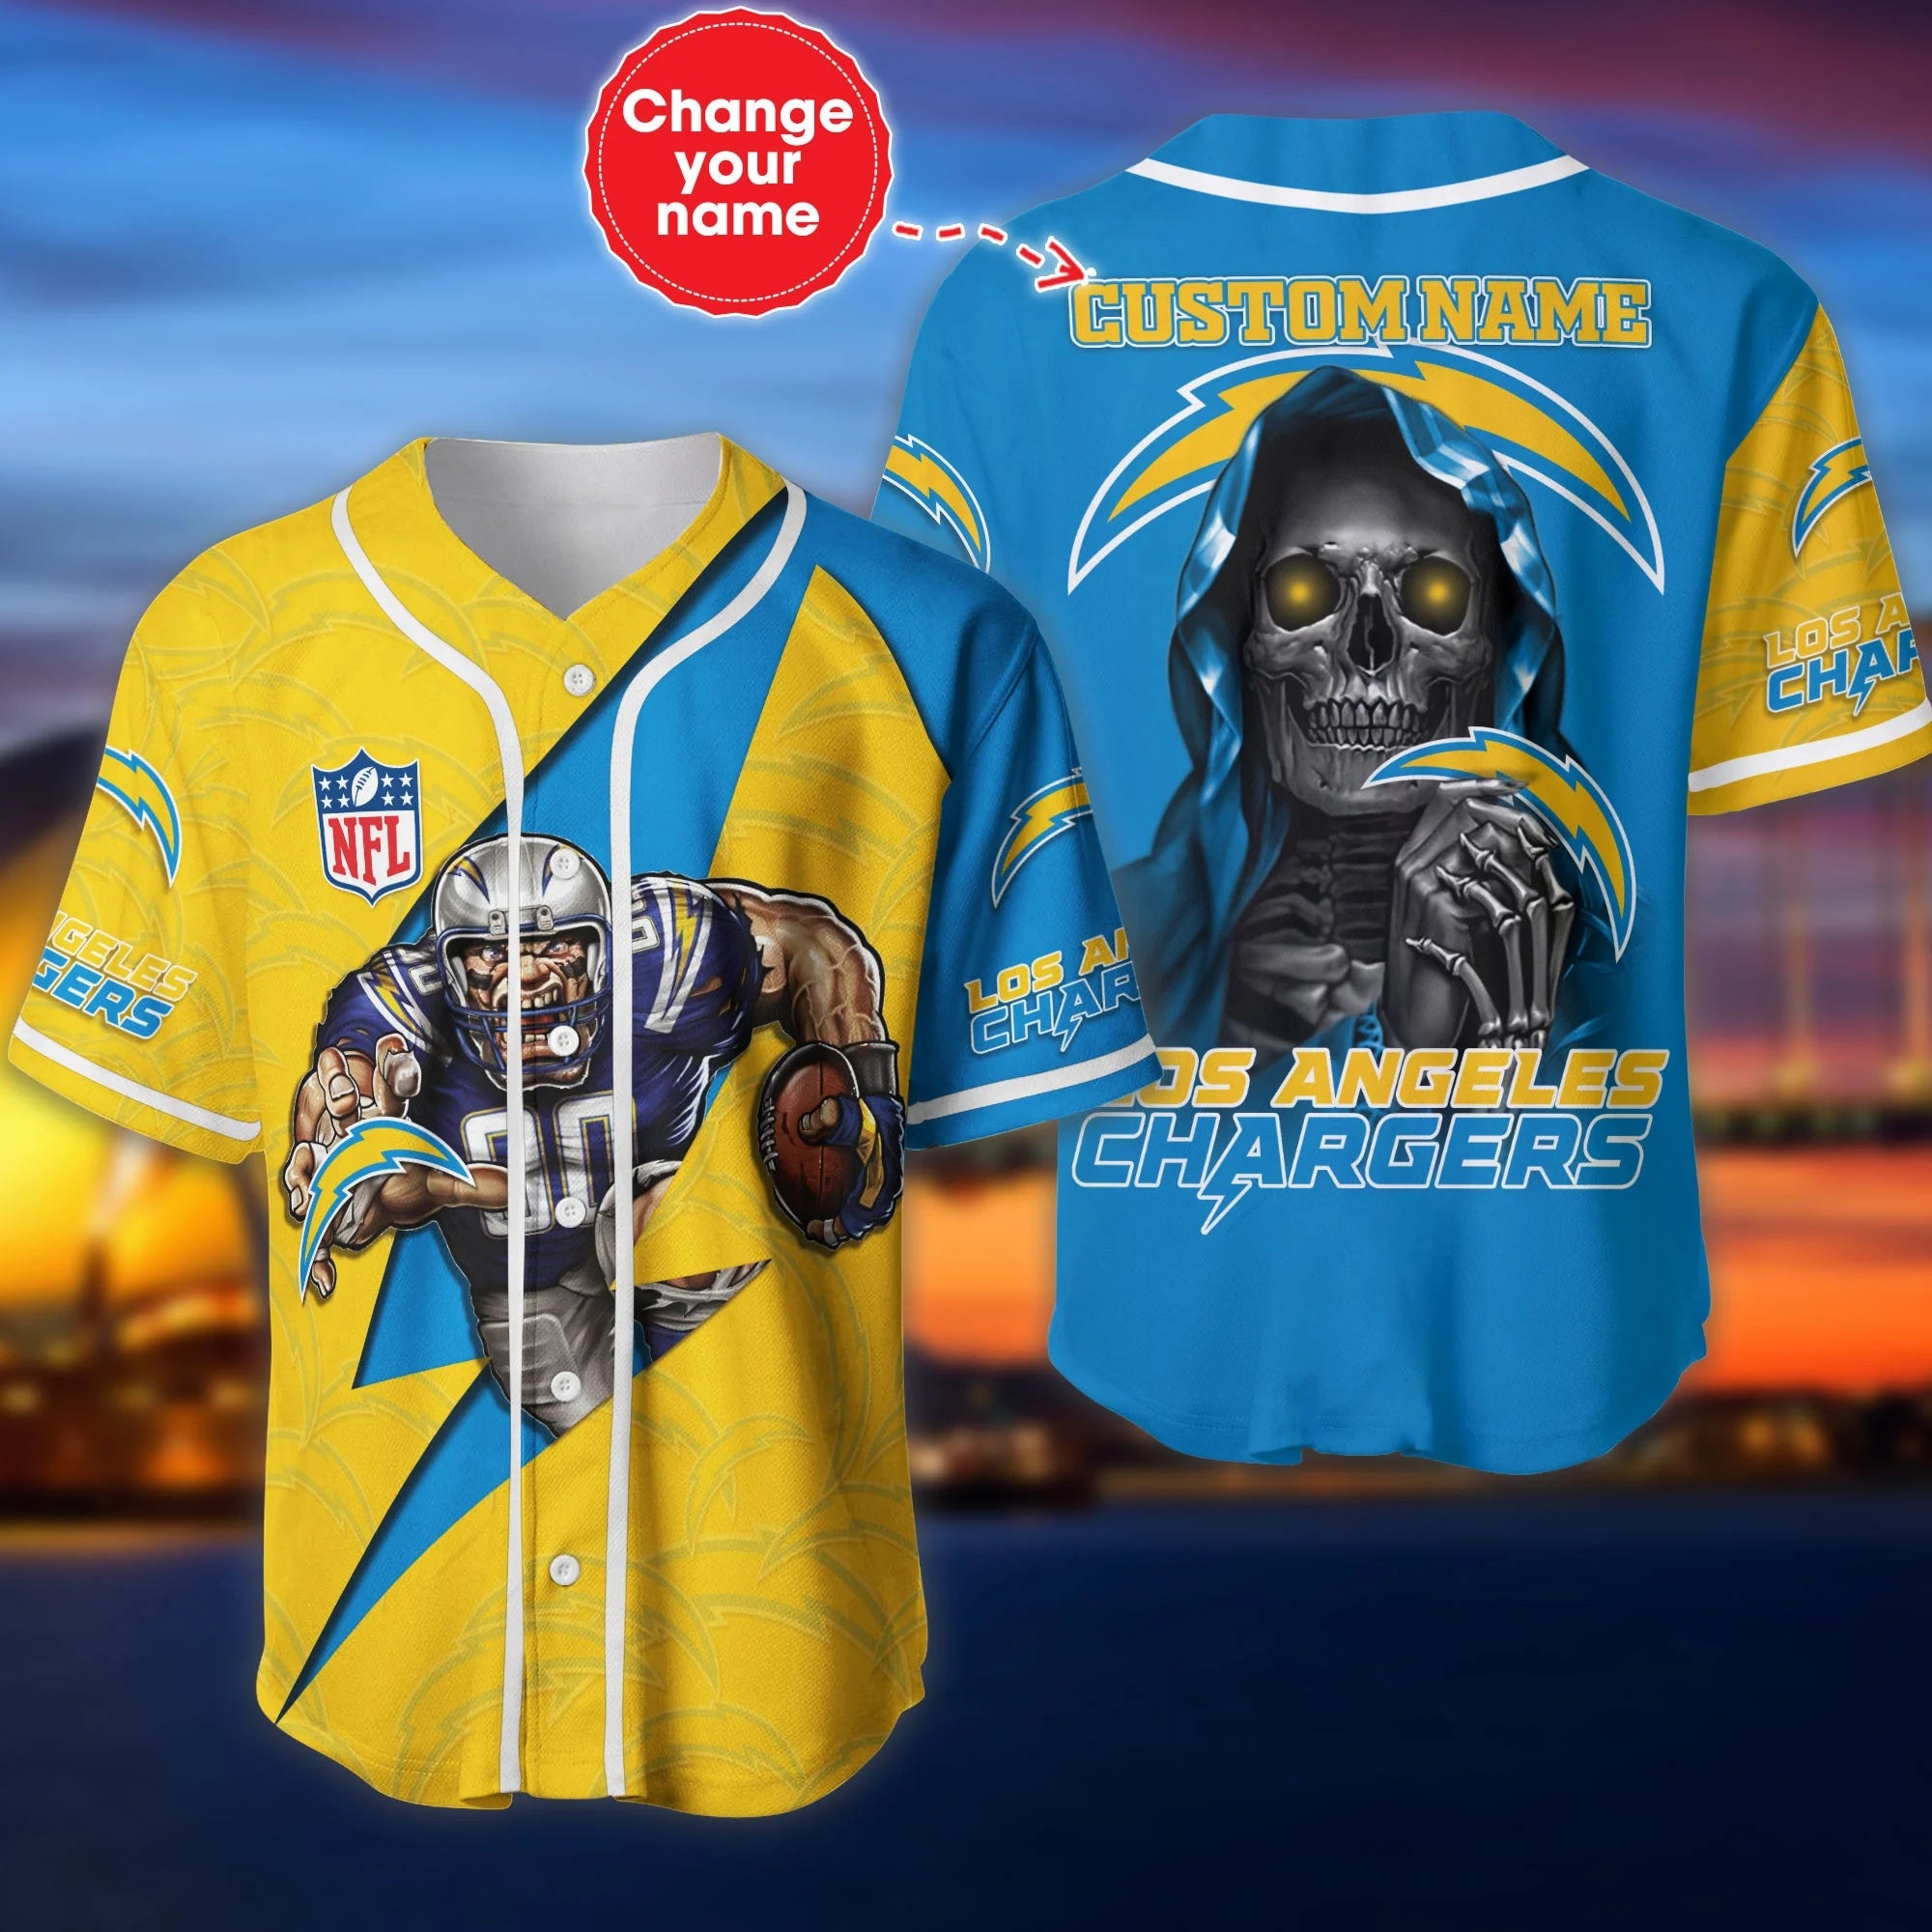 Lowest Price Los Angeles Chargers Baseball Jersey Shirt Skull Custom Name –  4 Fan Shop